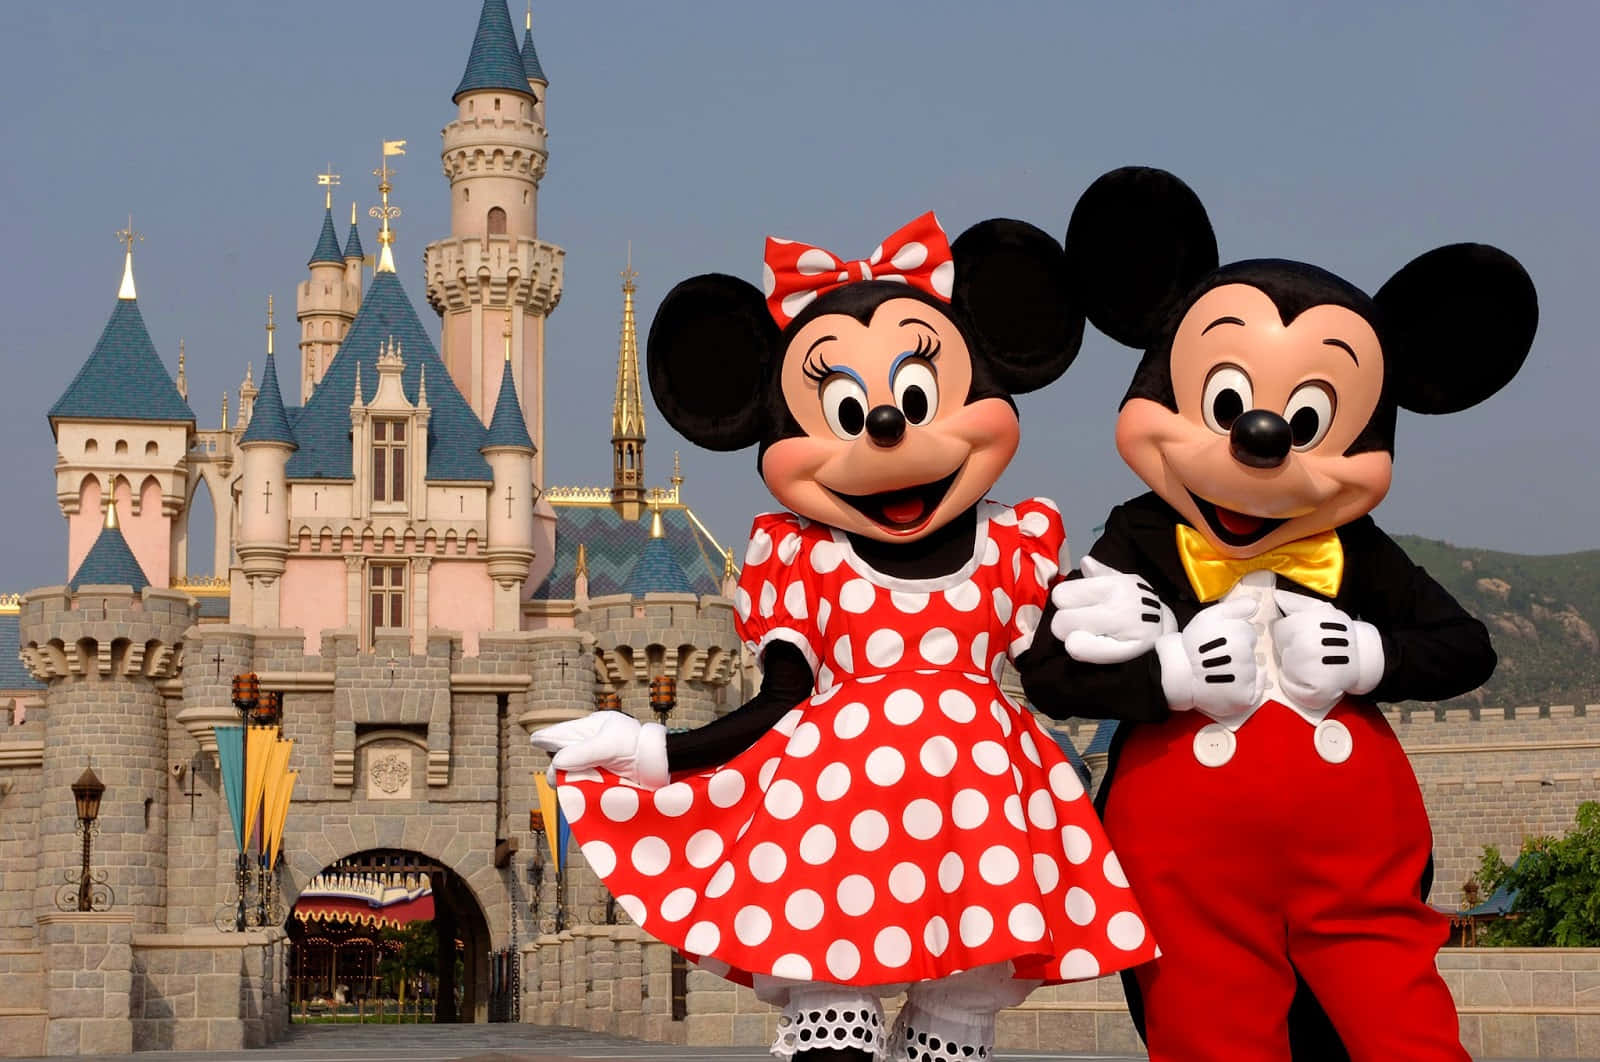 A Fun and Sweet Moment of Mickey and Minnie Mouse